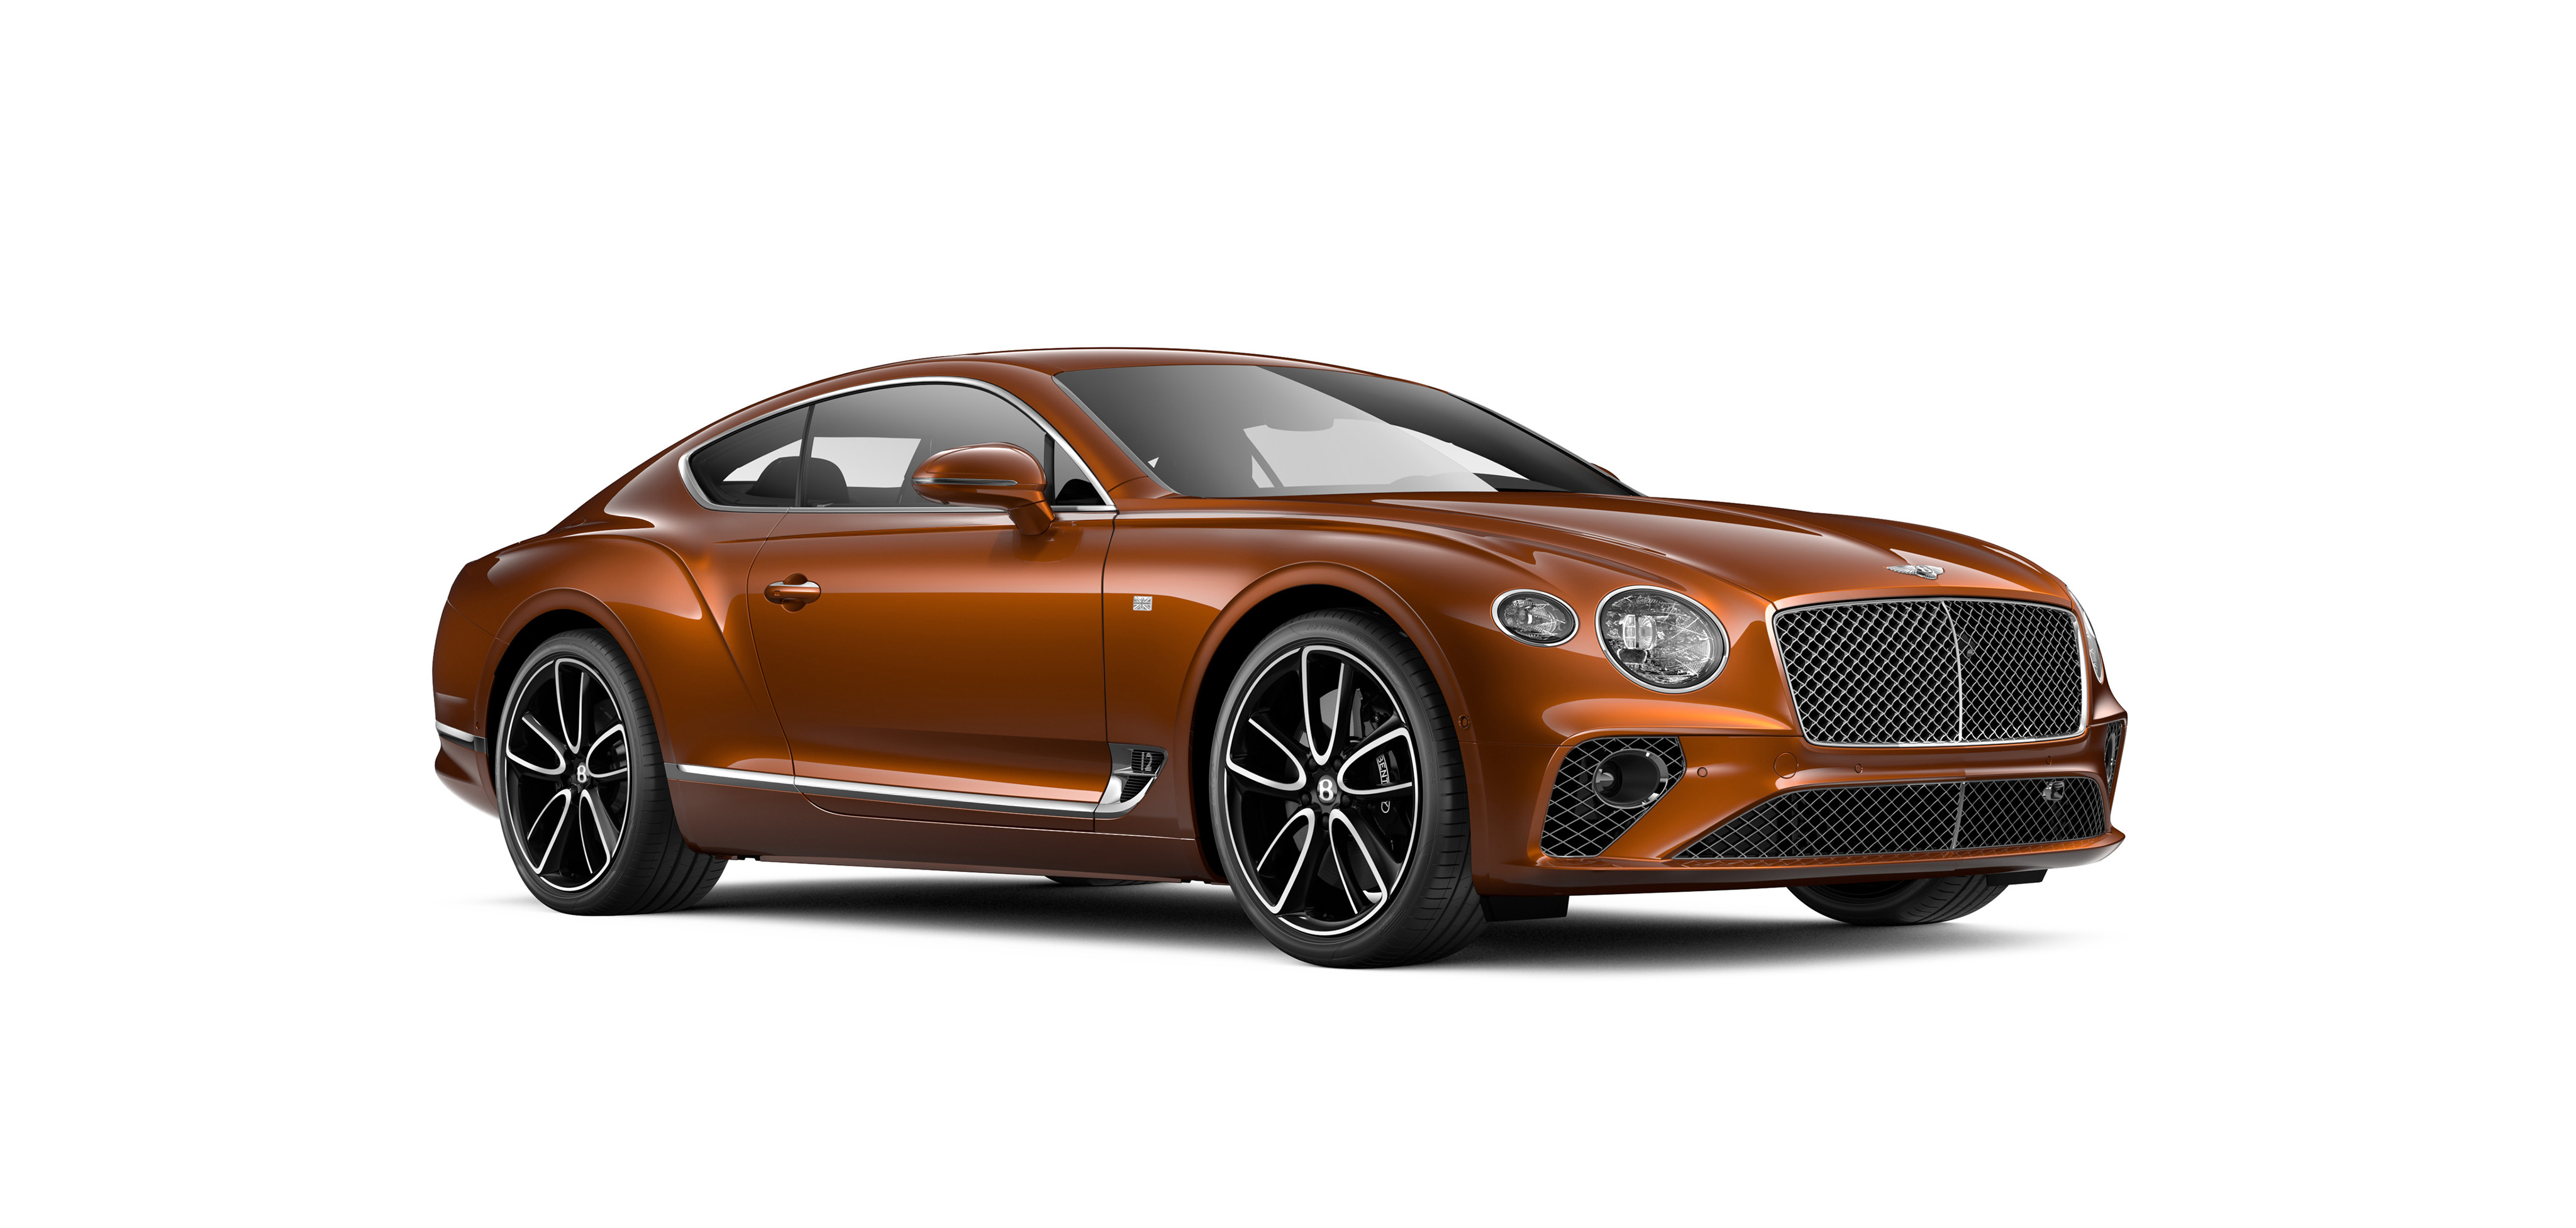 2018 Bentley Continental Gt, HD Cars, 4k Wallpapers, Images ...